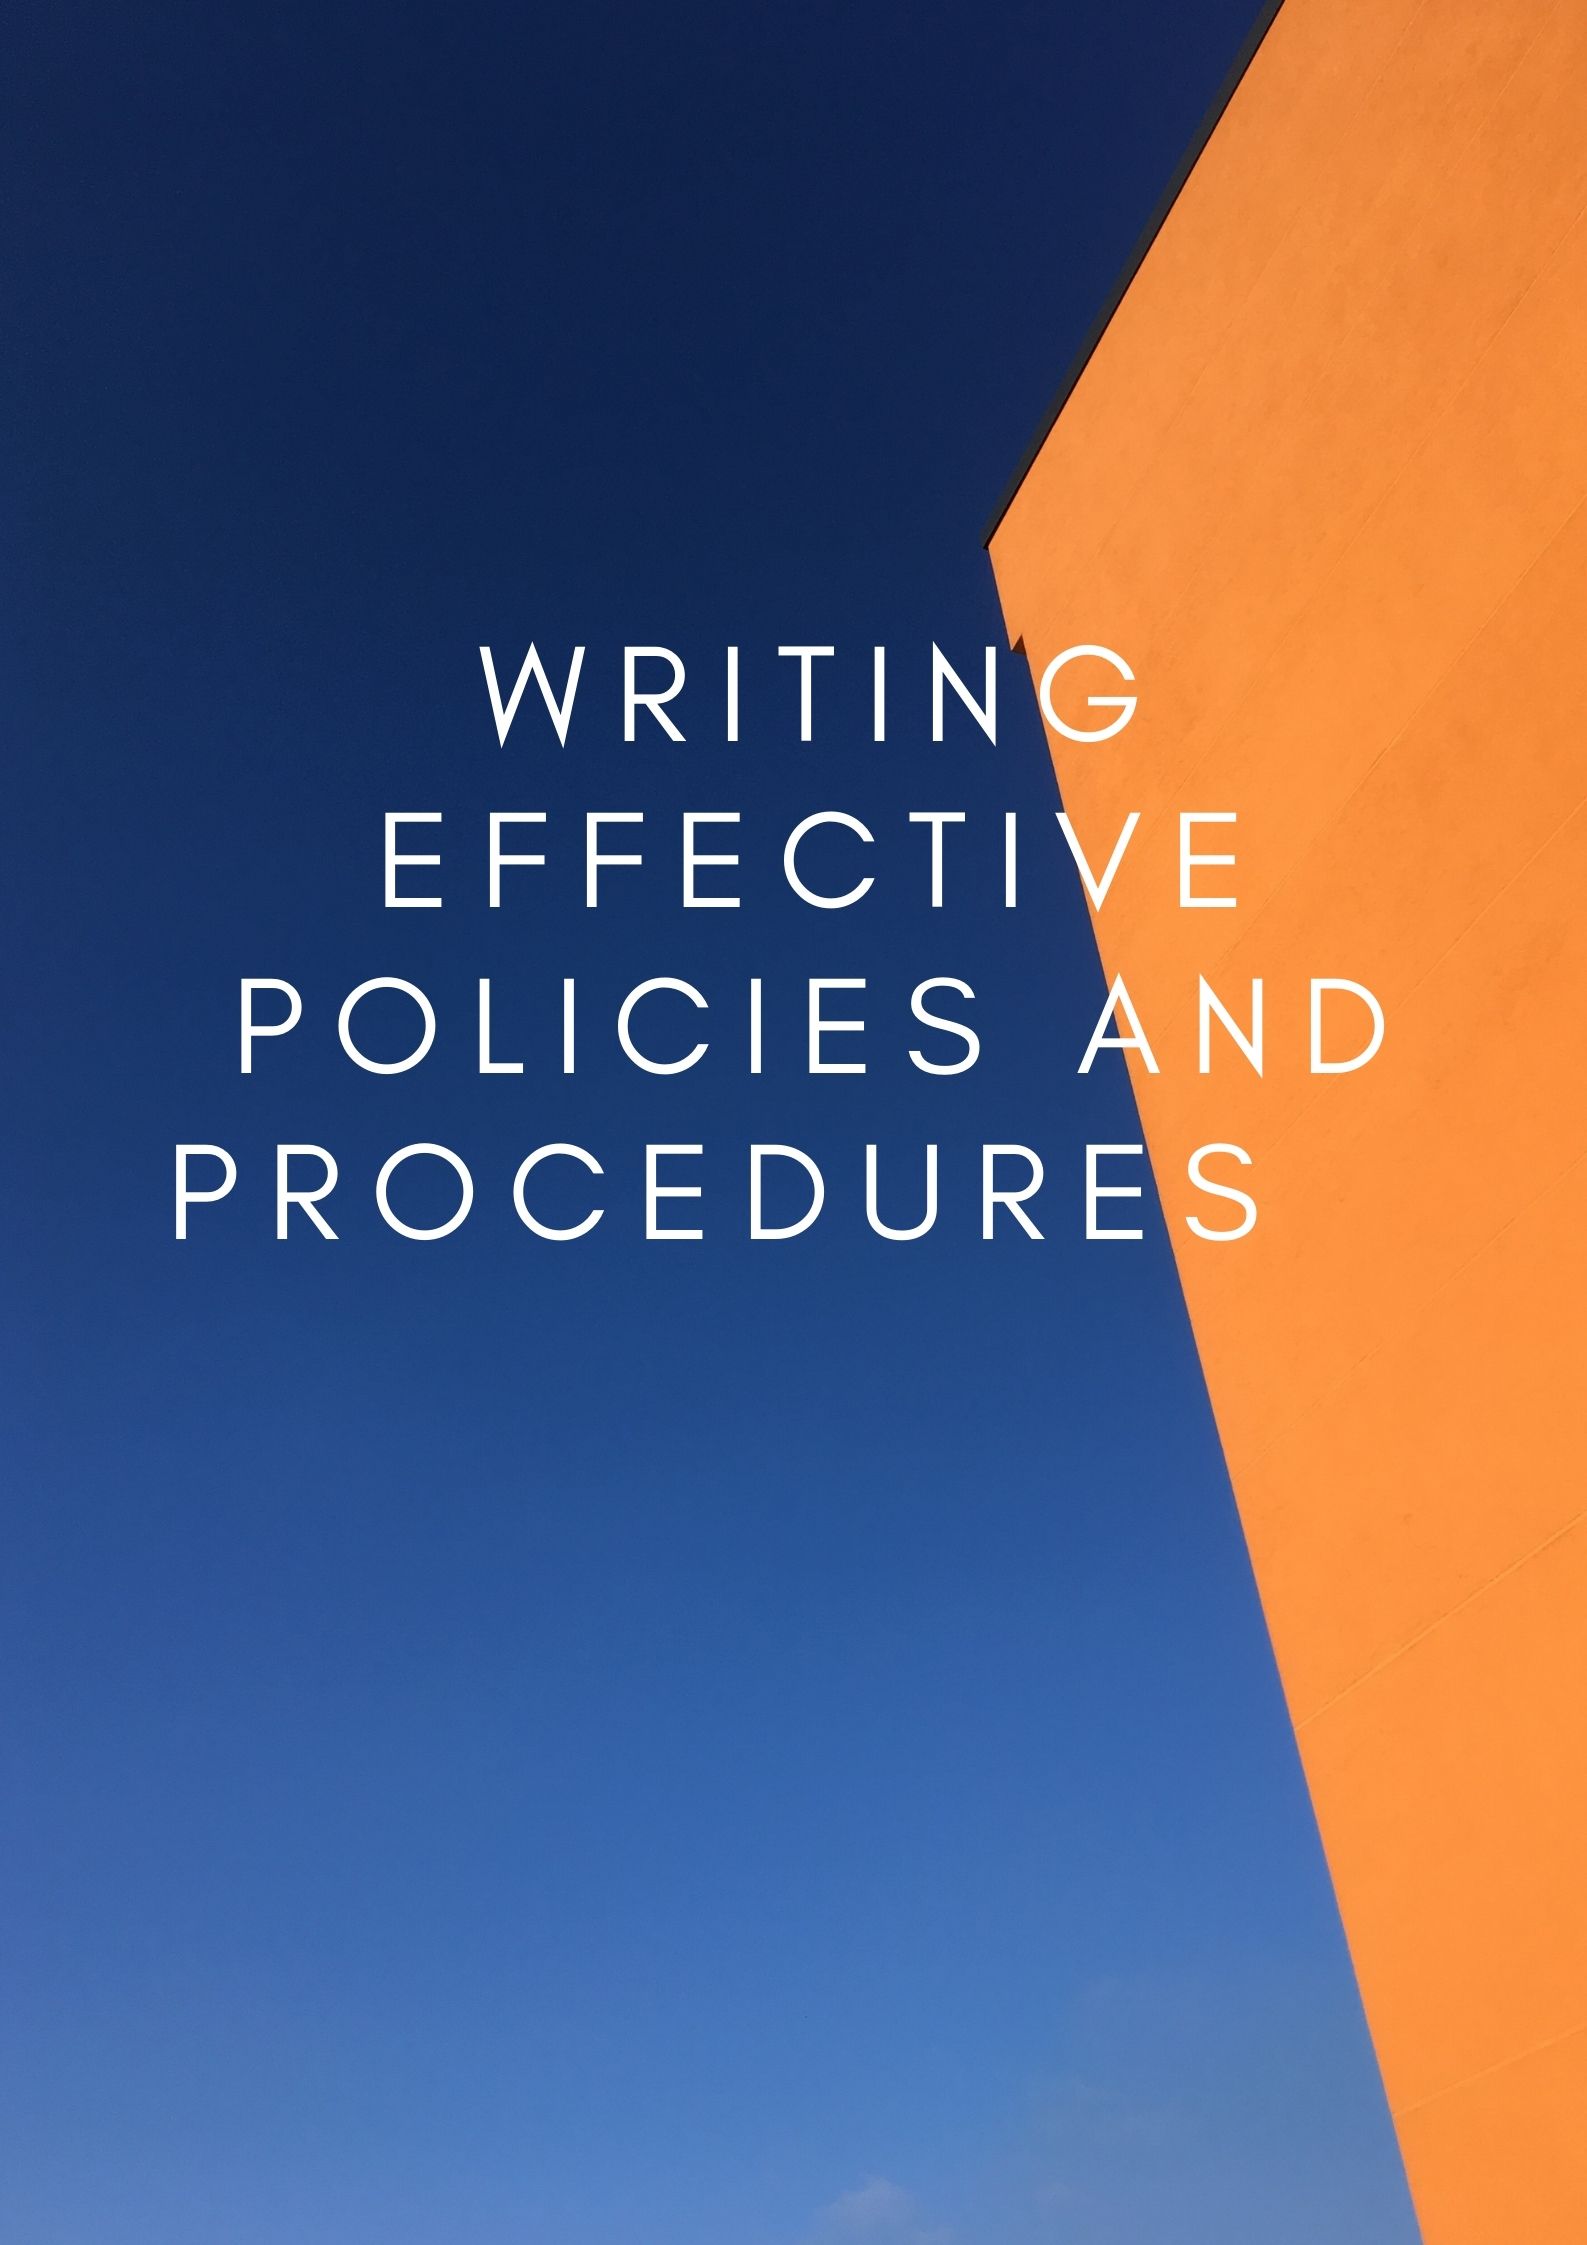 WORKSHOP ON WRITING EFFECTIVE POLICIES AND PROCEDURES, Istanbul, İstanbul, Turkey